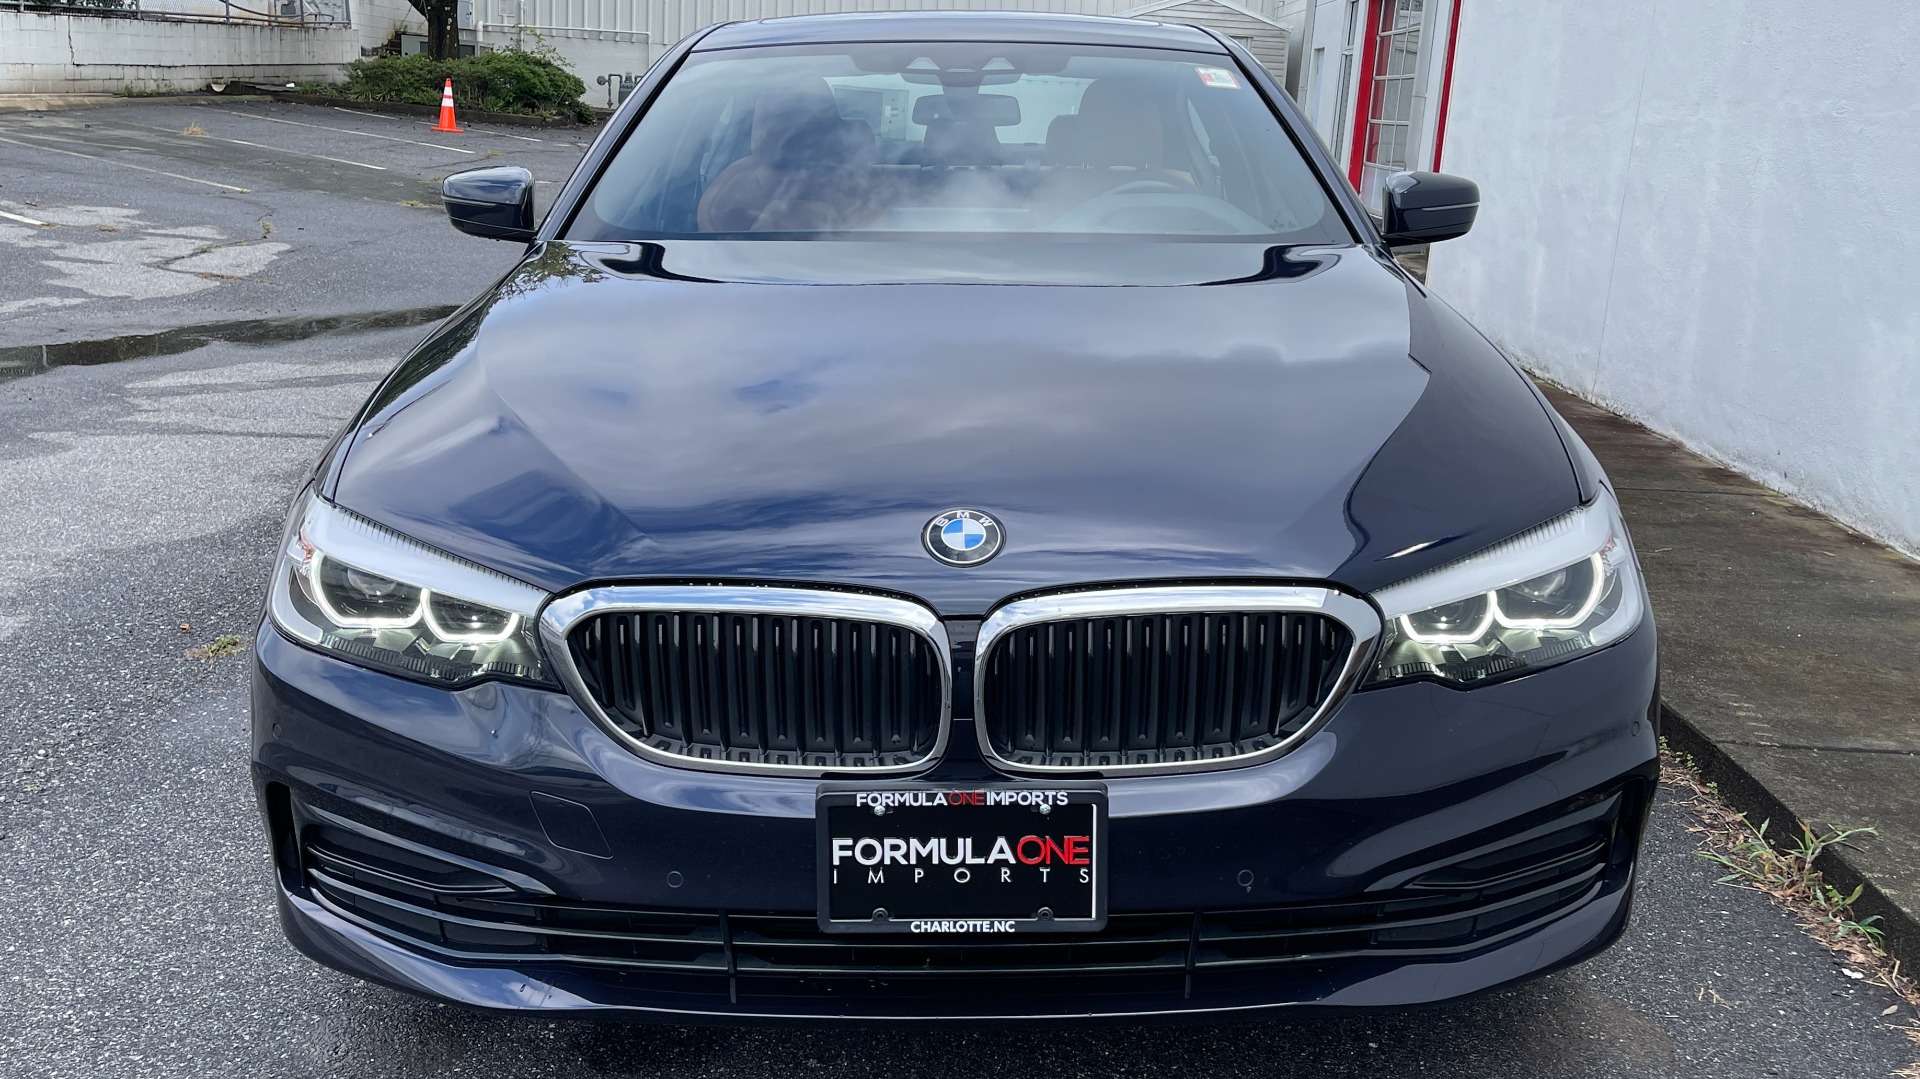 Used 2019 BMW 5 SERIES 530I XDRIVE / CONV PKG / NAV / HUD / HTD STS / SUNROOF / REARVIEW for sale Sold at Formula Imports in Charlotte NC 28227 19